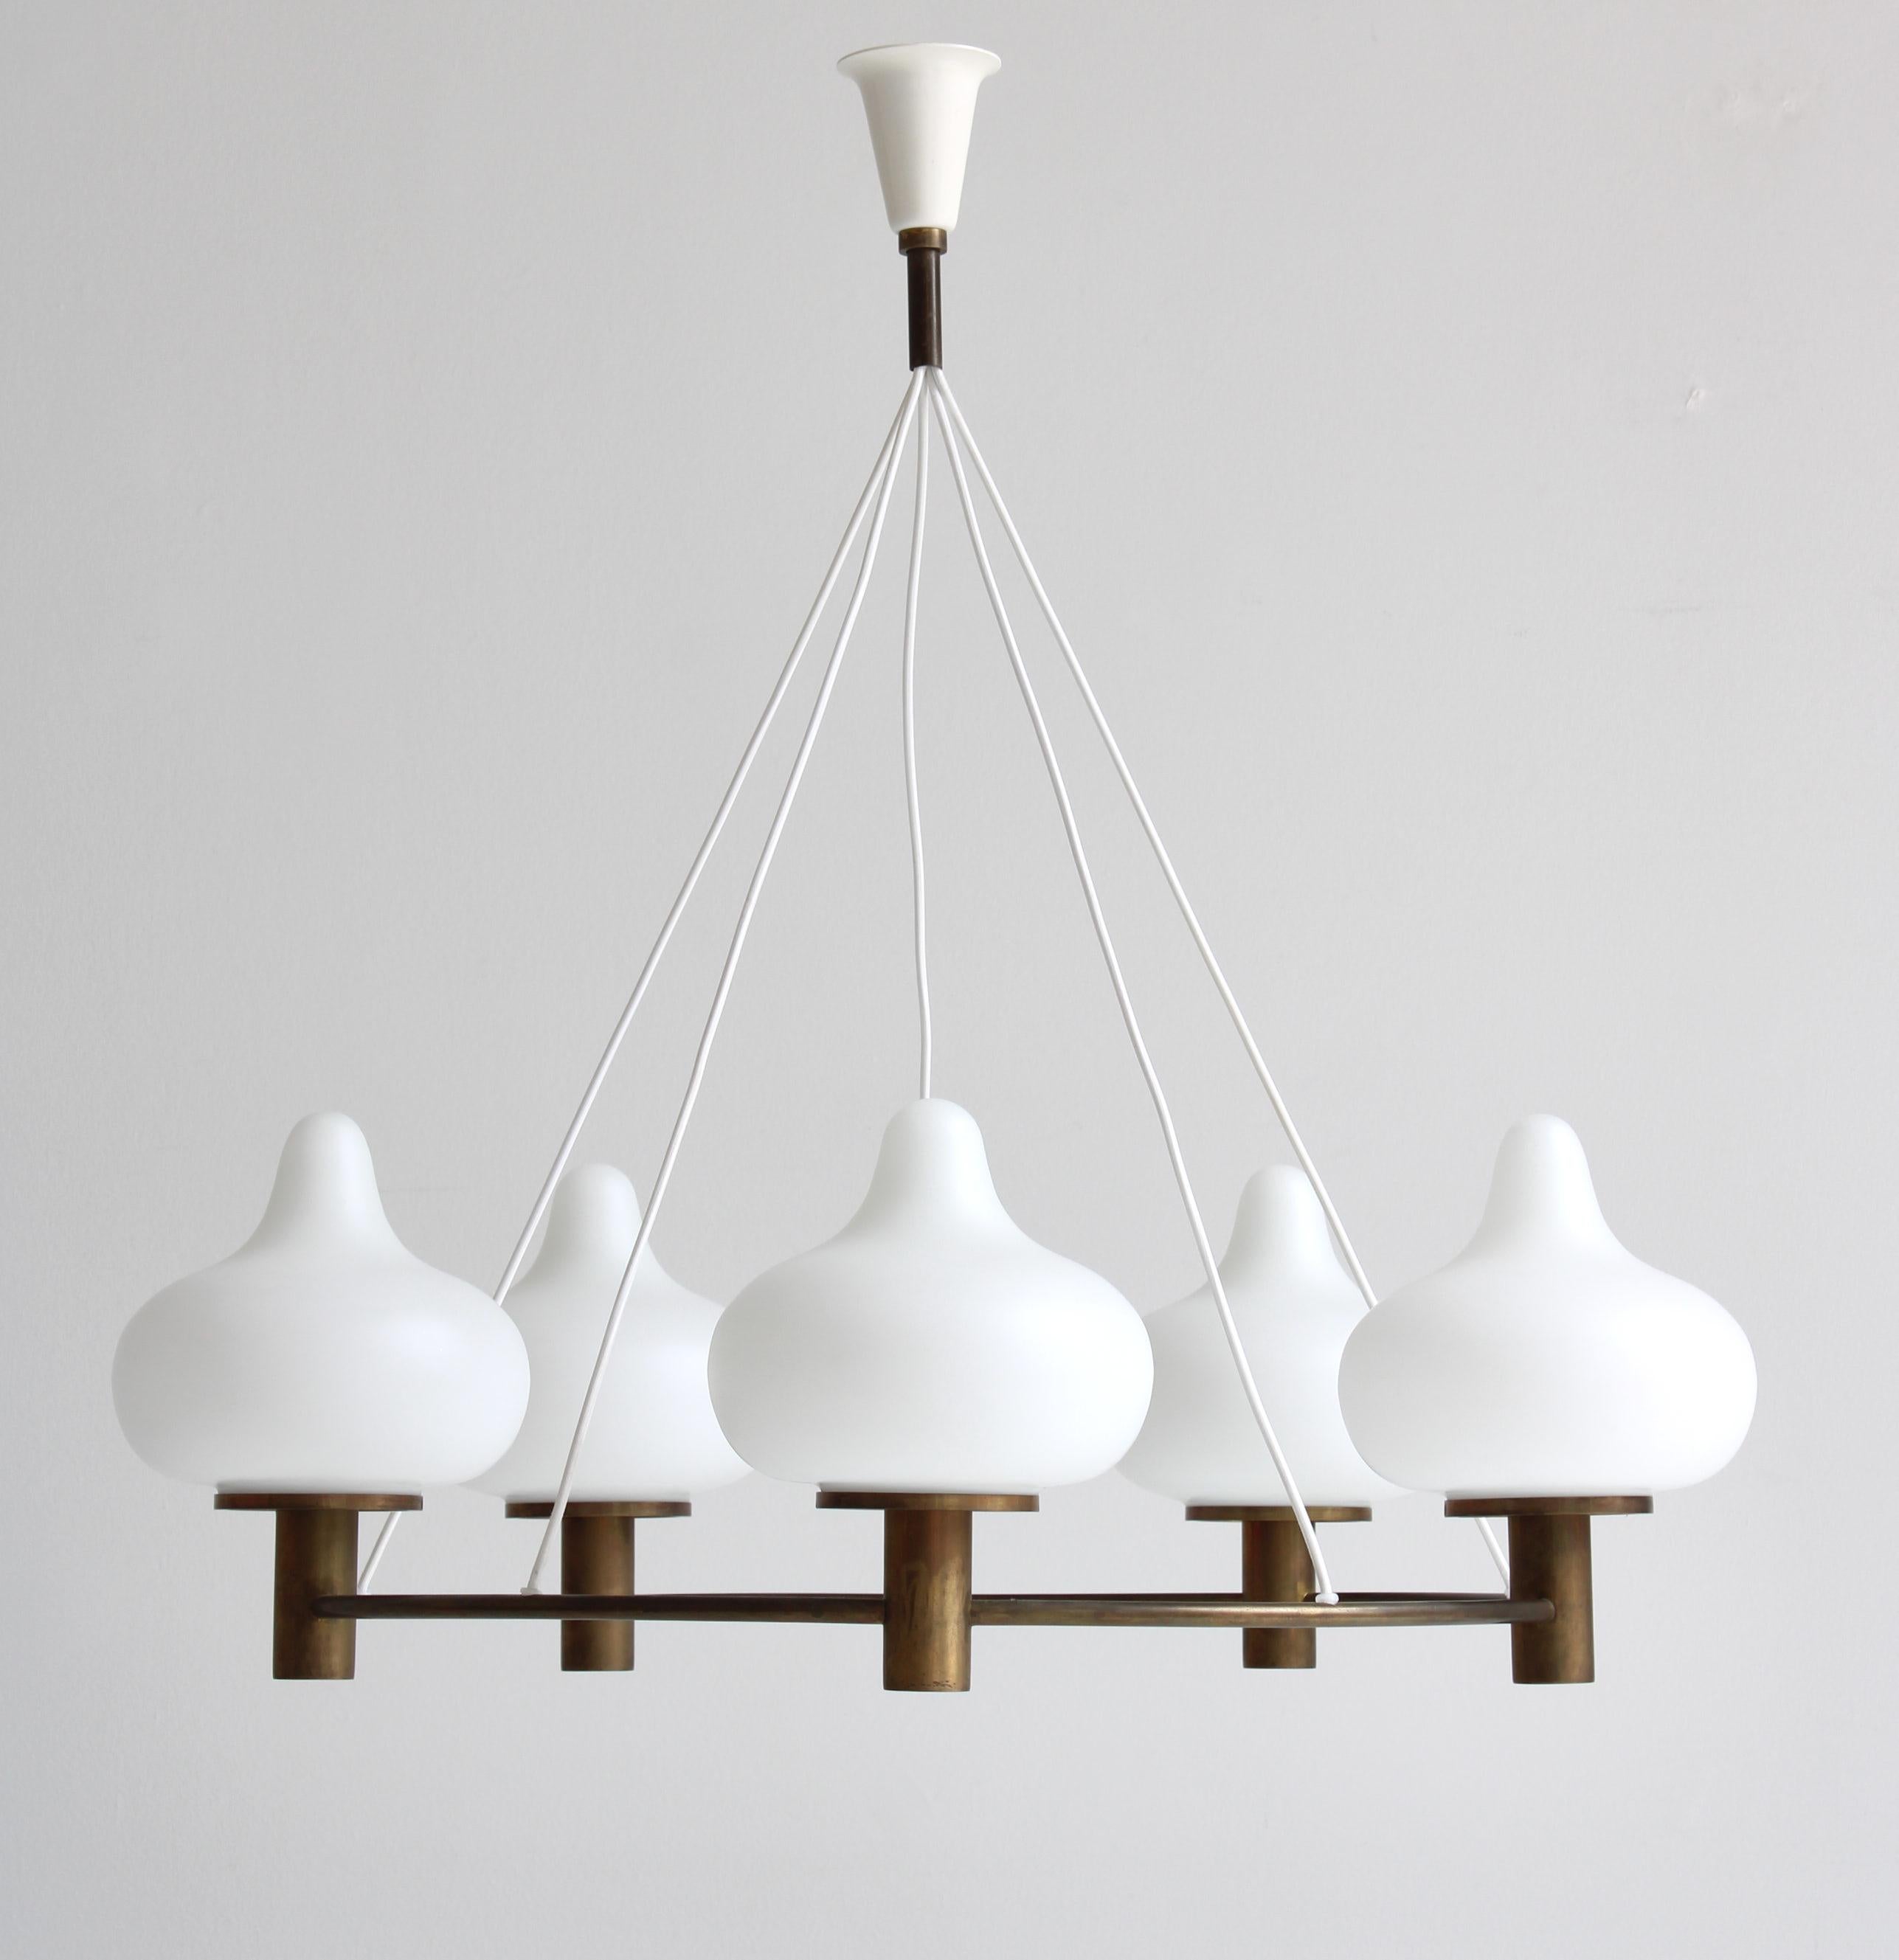 Rare and important ring chandelier designed in Denmark in 1953 by Mogens Hammer & Henning Moldenhawer for Louis Poulsen. The ring is made from beautifully patinated brass and the onion-shaped shades of hand blown matte opaline glass. This design was